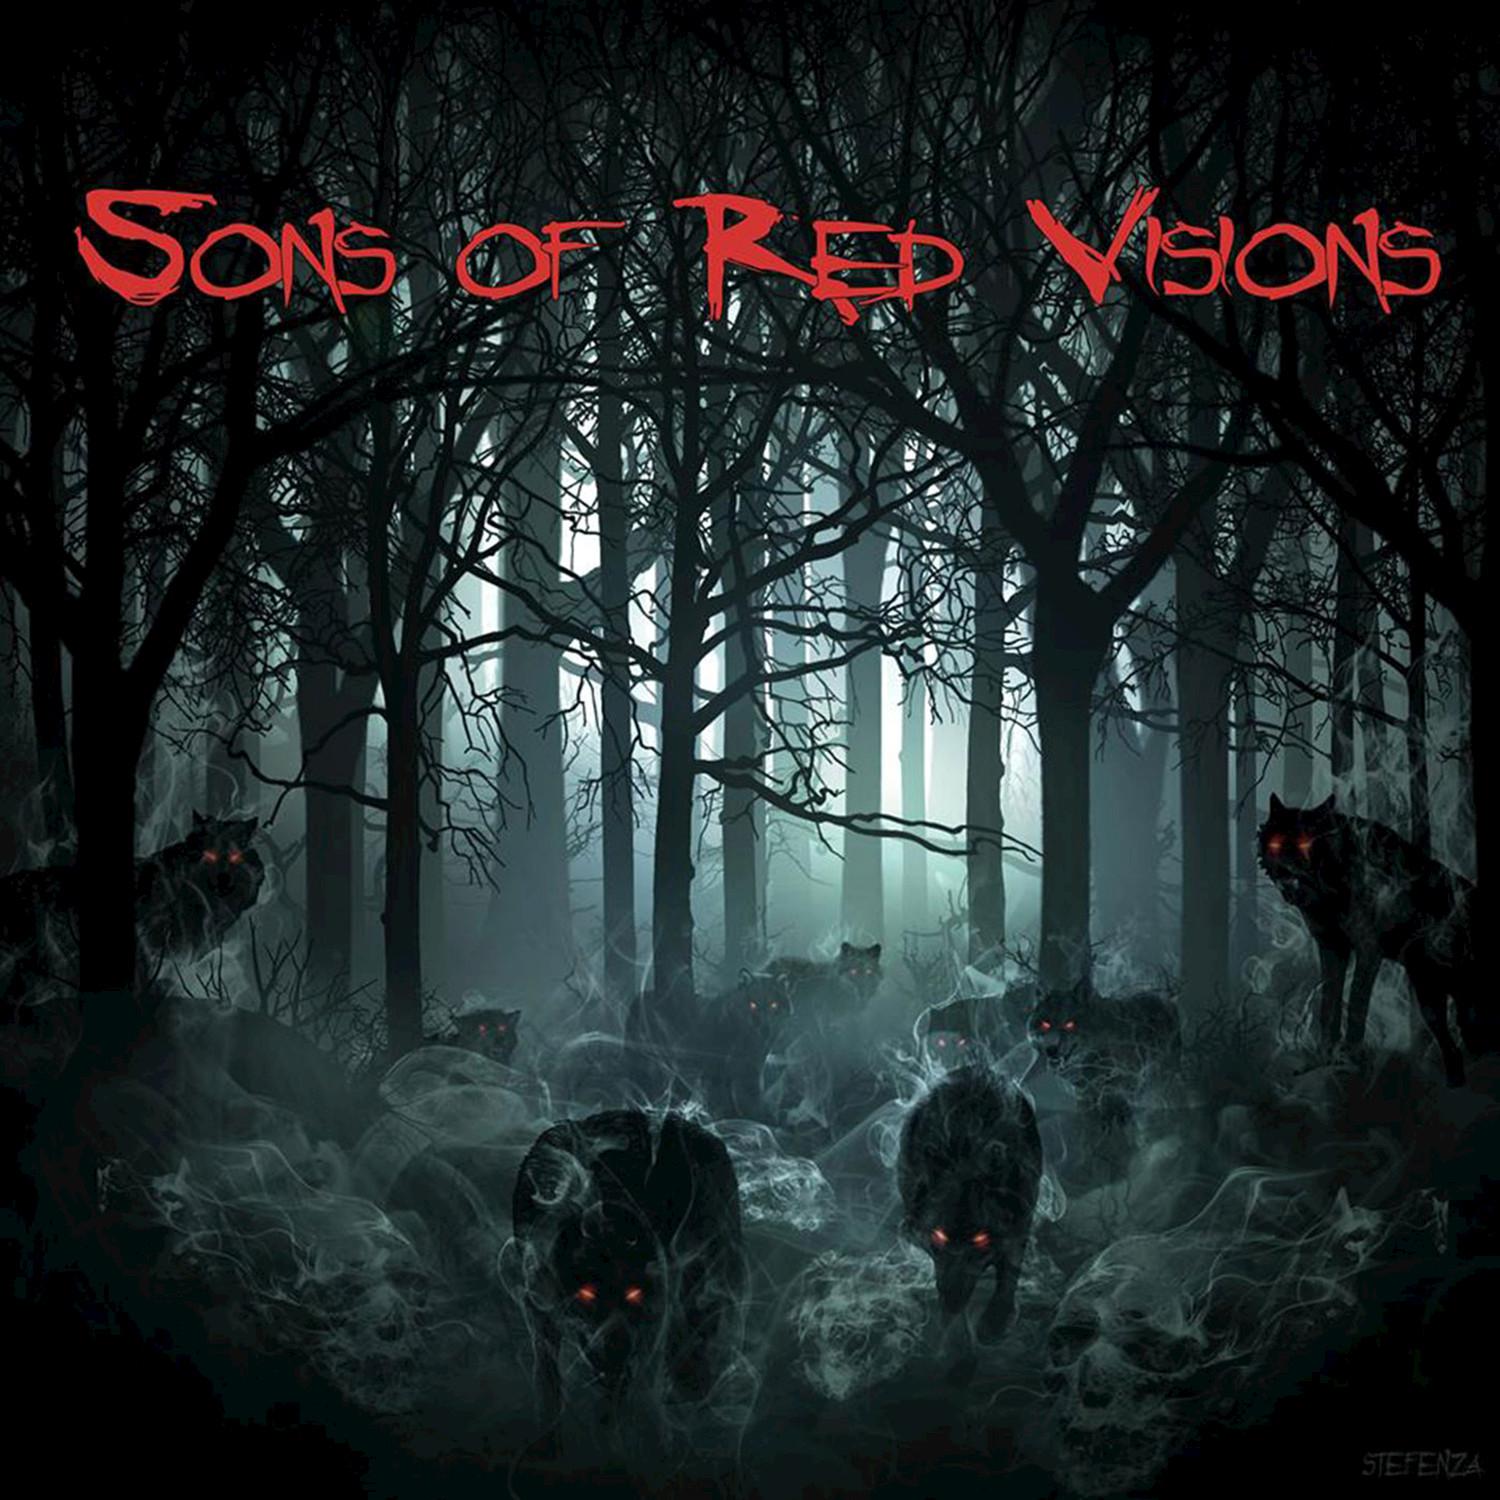 Sons of Red Visions